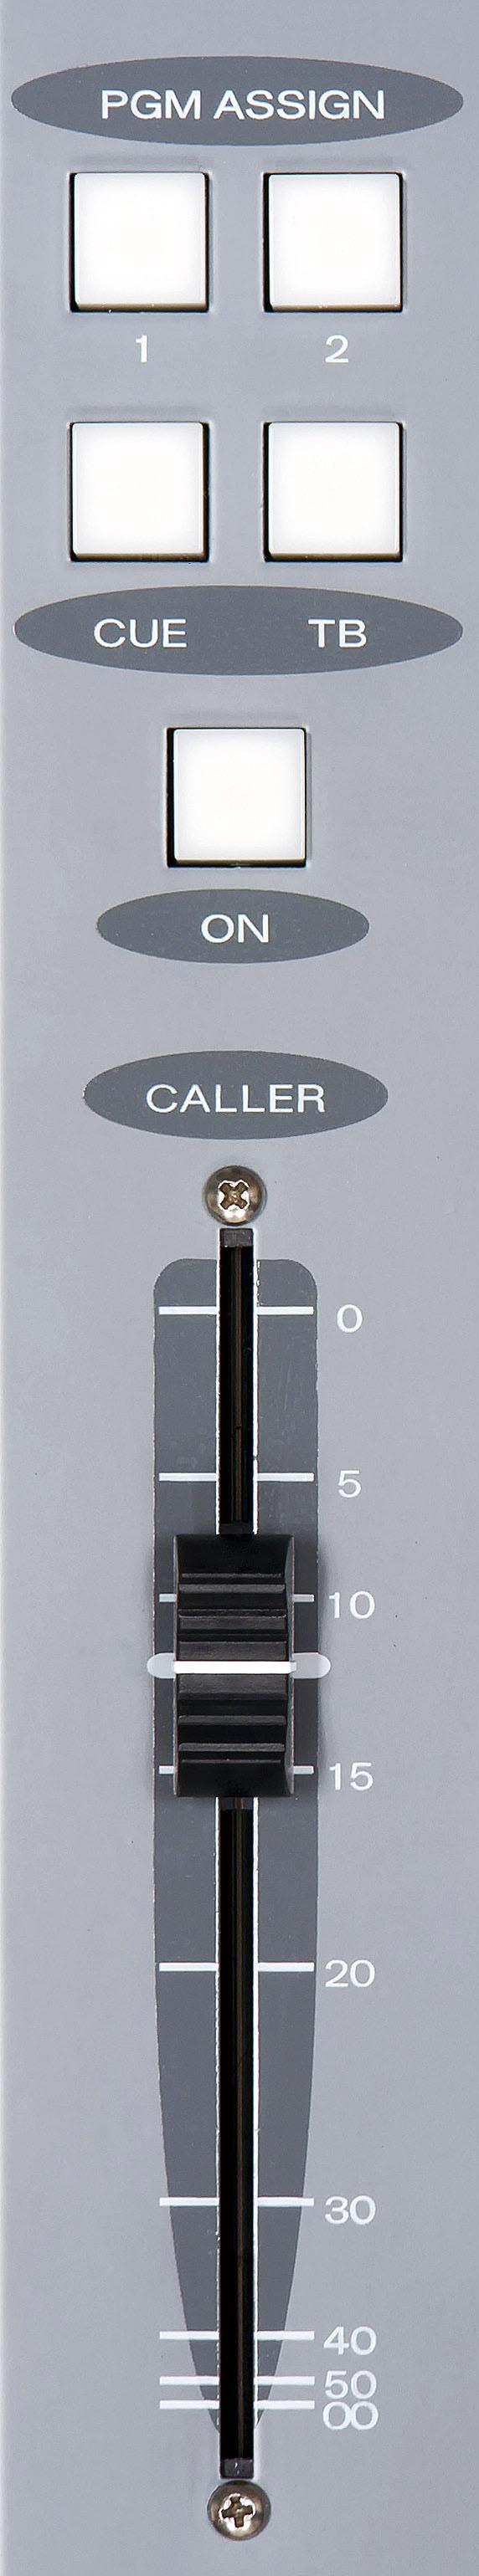 CONTOS AND FUNCTIONS Caller Set-Ups Pre-air segment communication between the console operator (DJ) and callers is aided by the CU button, which places the caller s voice on the console s cue speaker